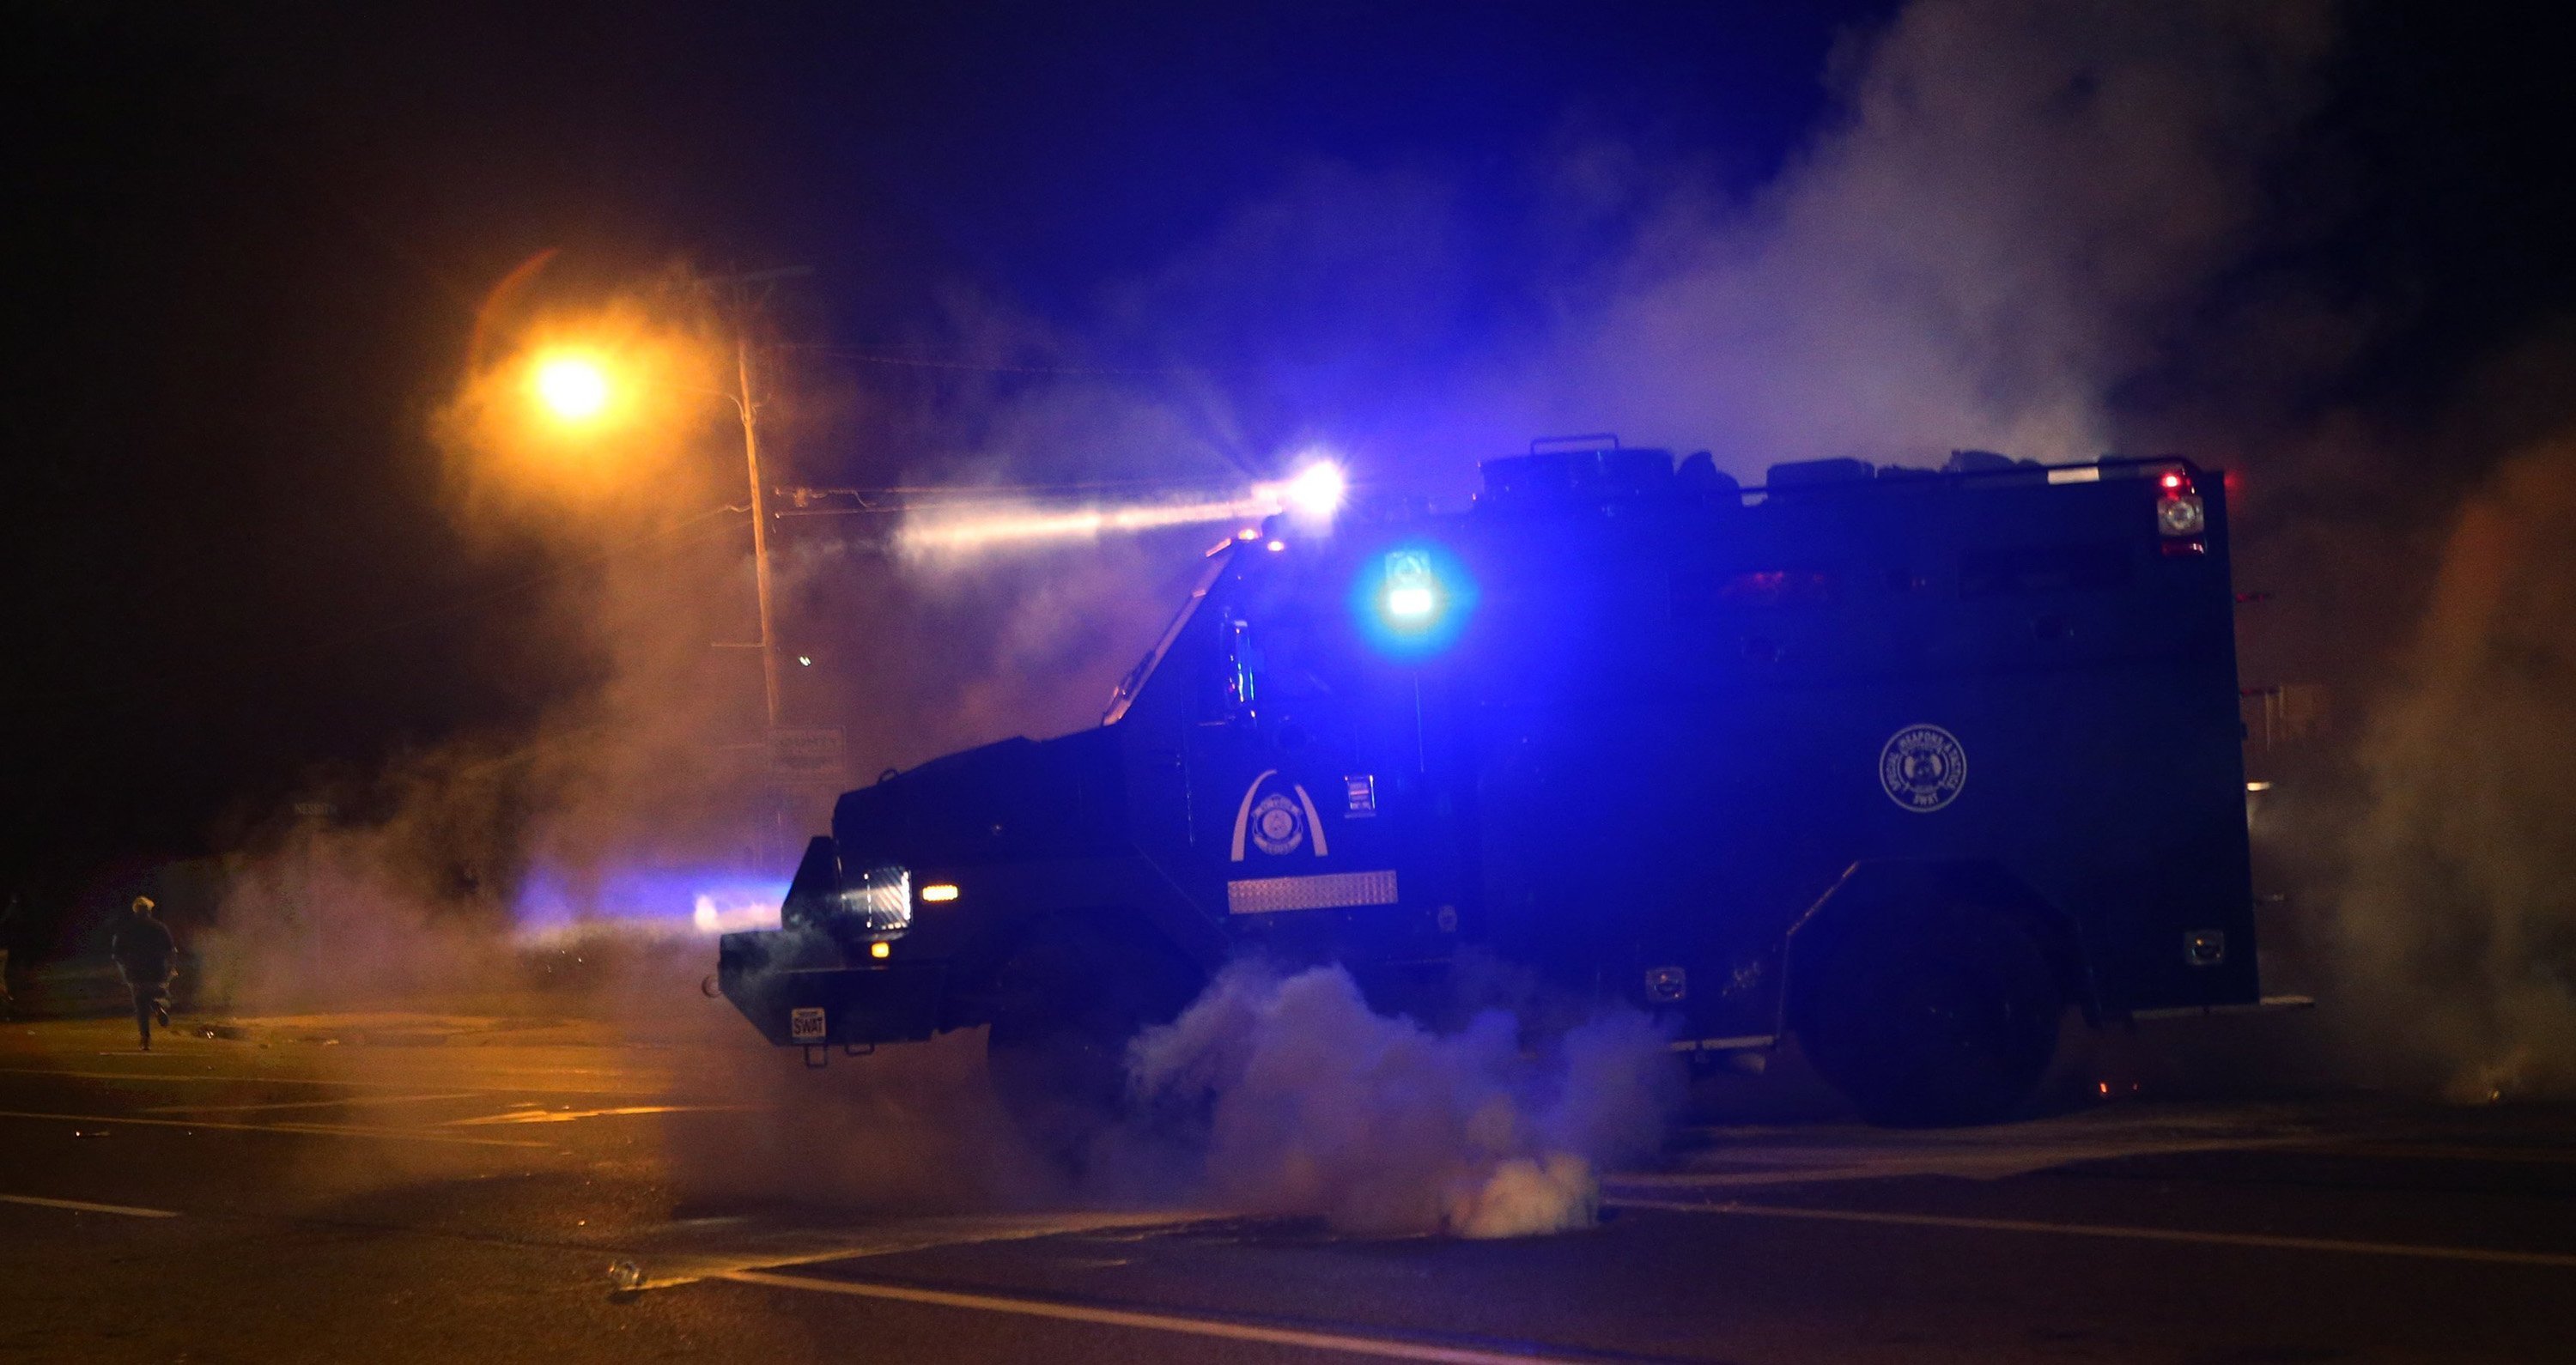 A tactical truck chases protesters down the street, shooting tear gas on W. Florissant Avenue in Ferguson, Mo. on Sunday afternoon, Aug. 17, 2014, after protesters throw rocks and bottles towards the police. (J. B. Forbes/St. Louis Post-Dispatch/MCT)